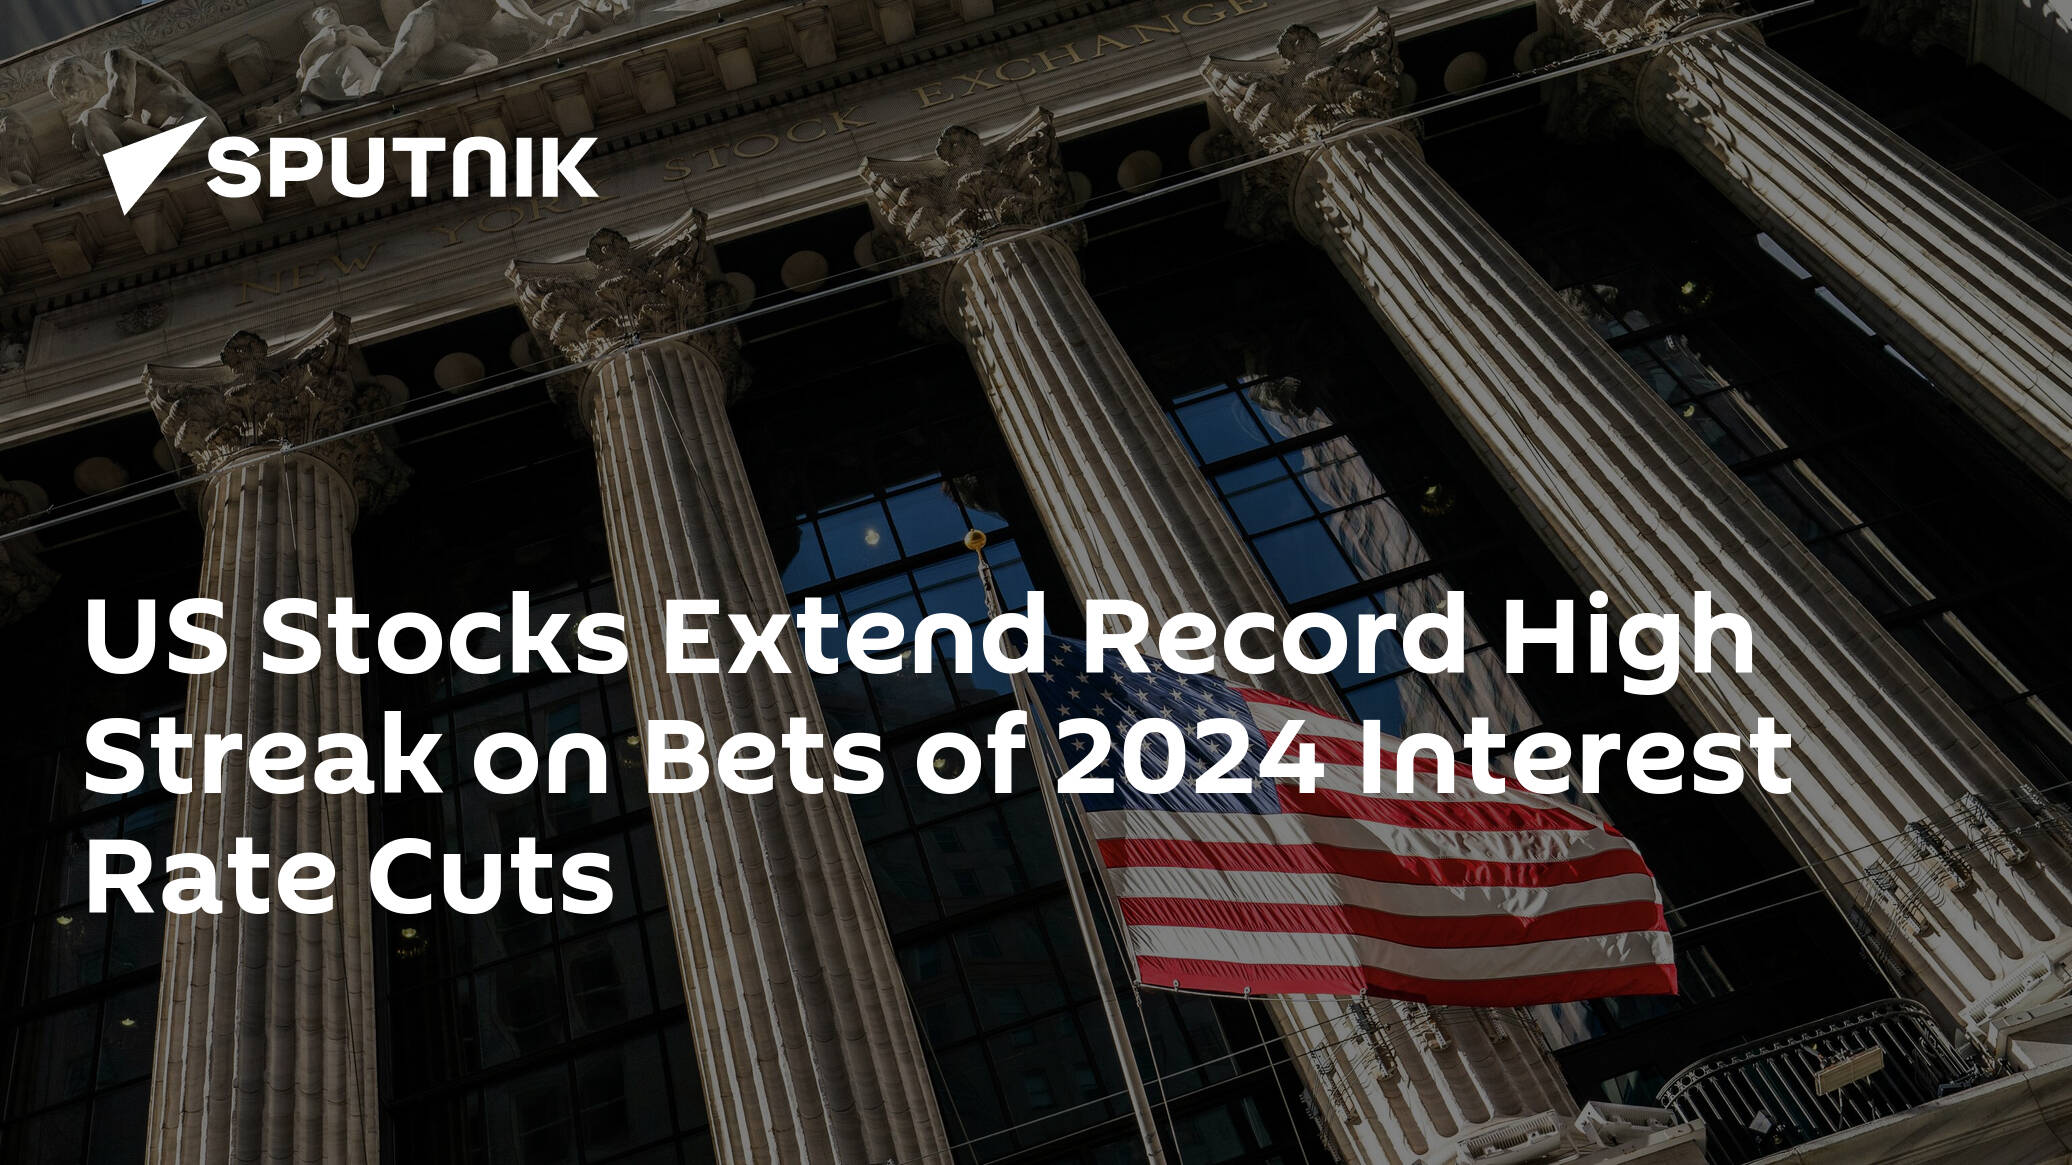 US Stocks Extend Record High Streak on Bets of 2024 Interest Rate Cuts